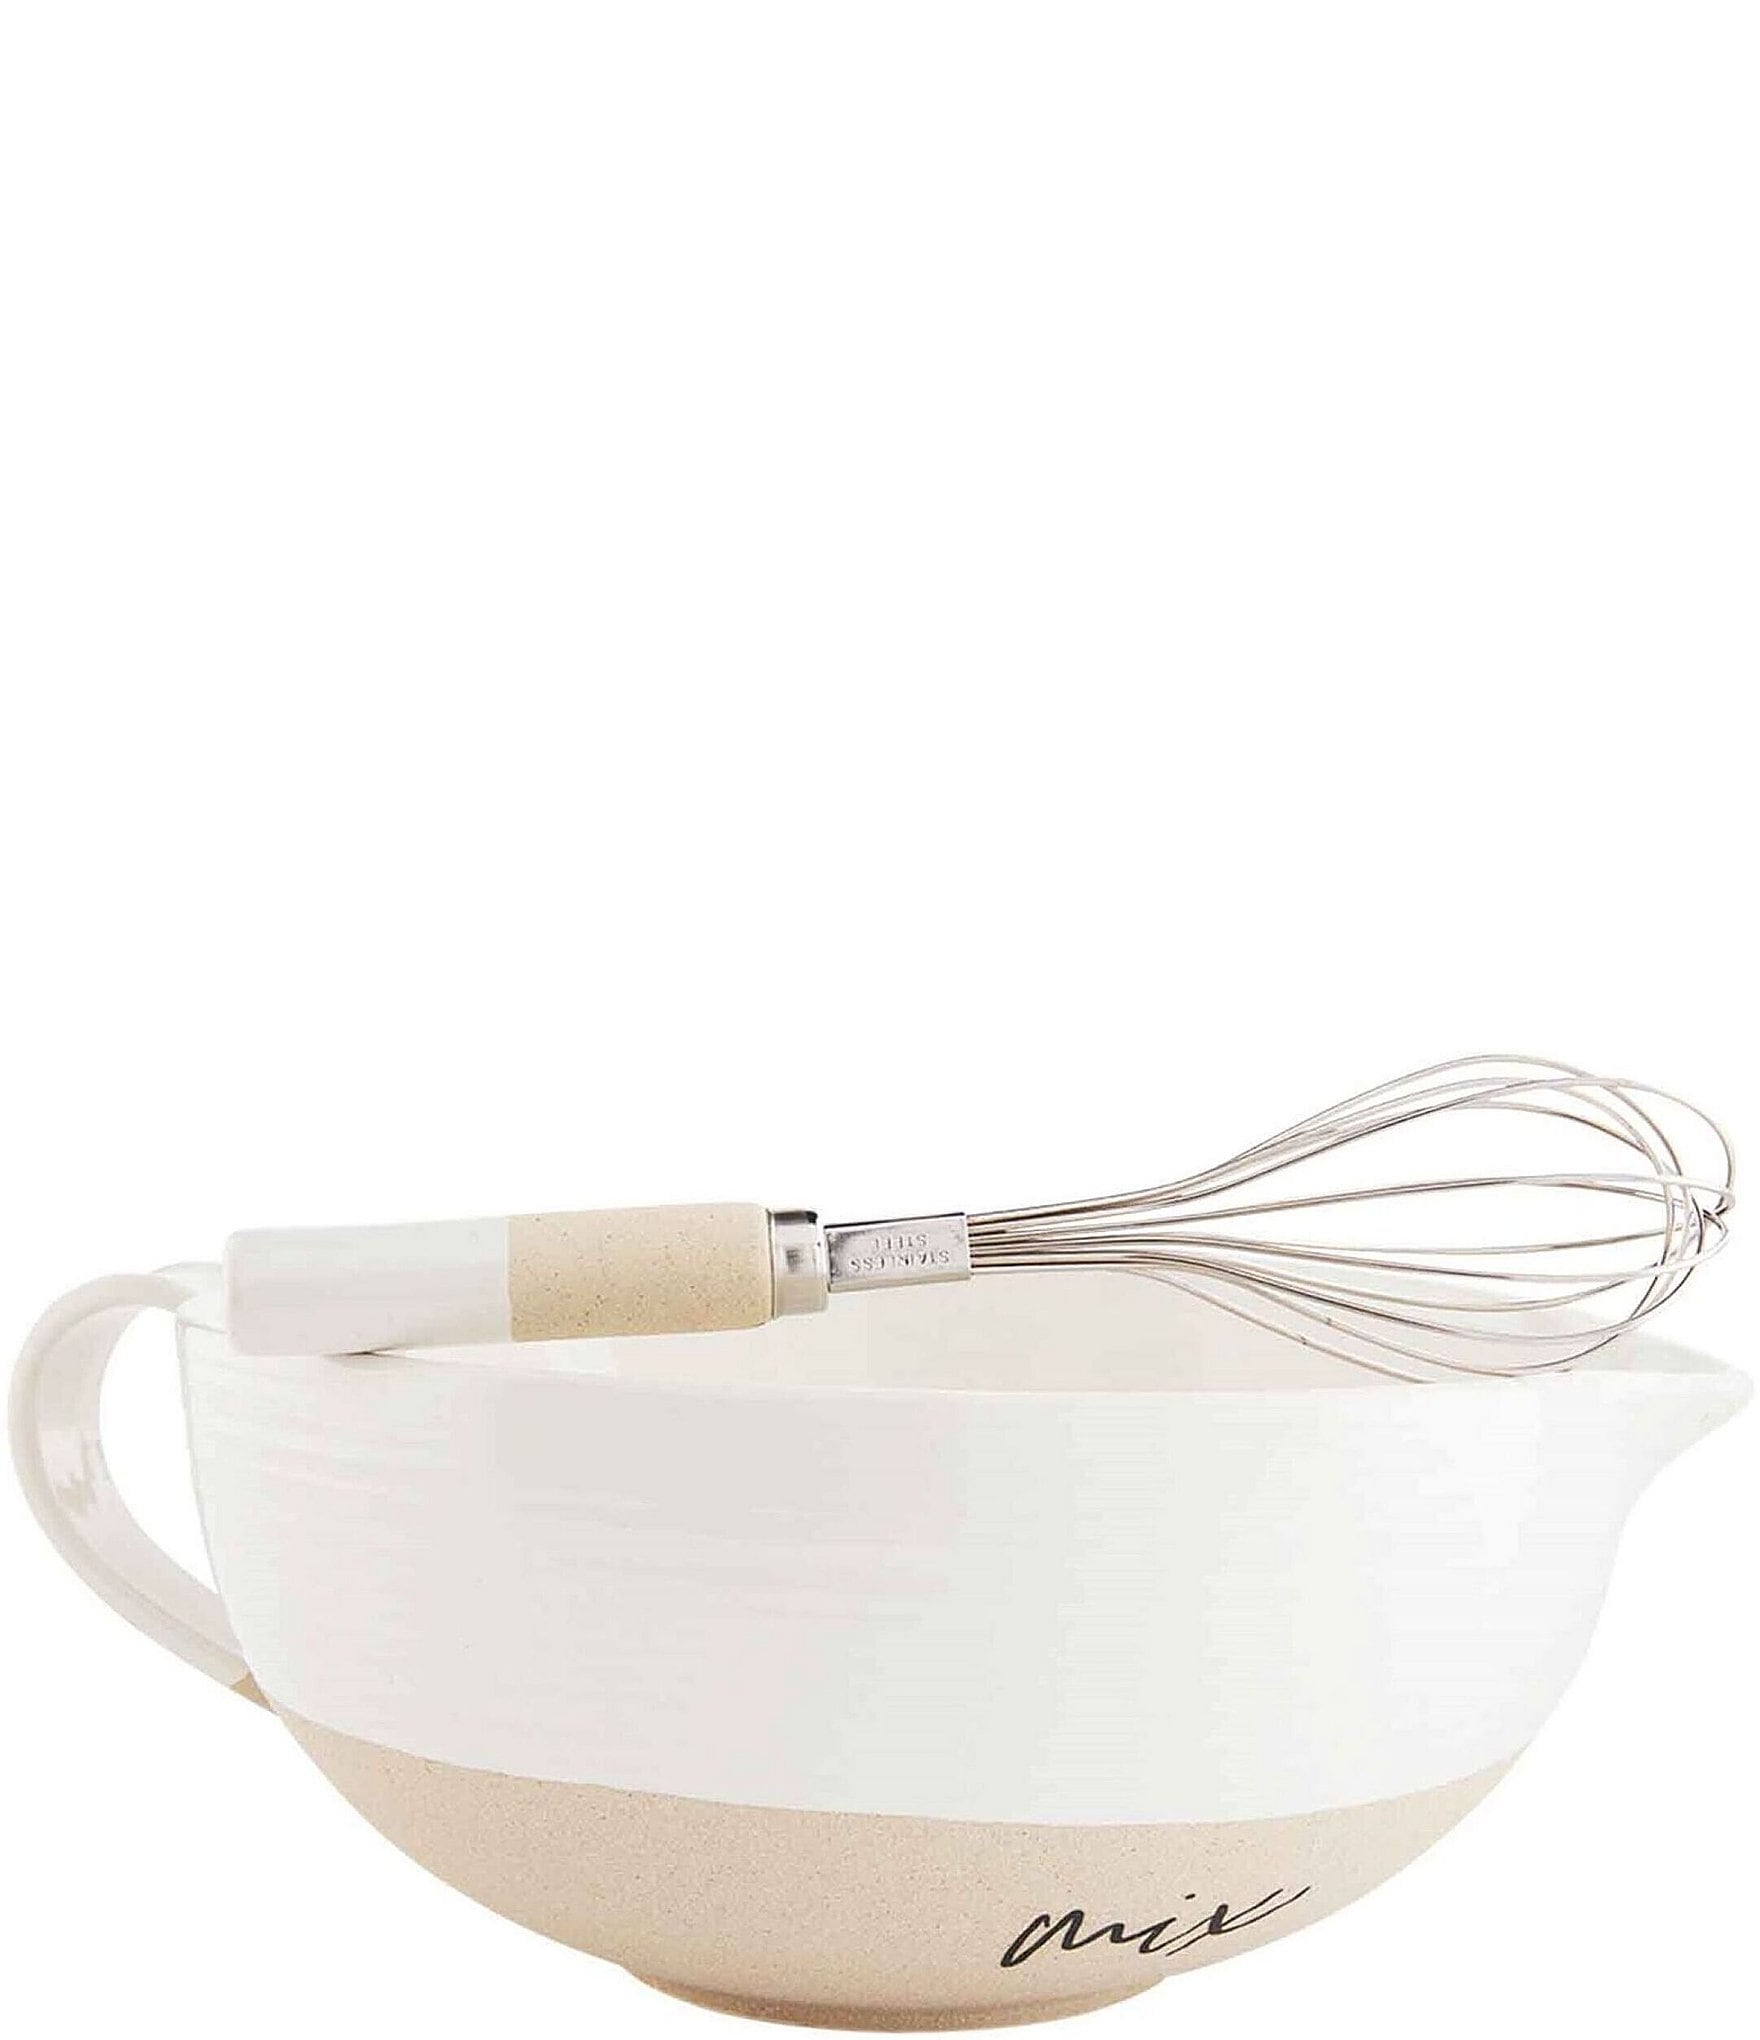 https://dimg.dillards.com/is/image/DillardsZoom/zoom/mud-pie-farmhouse-collection-mixing-bowl-and-whisk-2-piece-set/20245075_zi.jpg